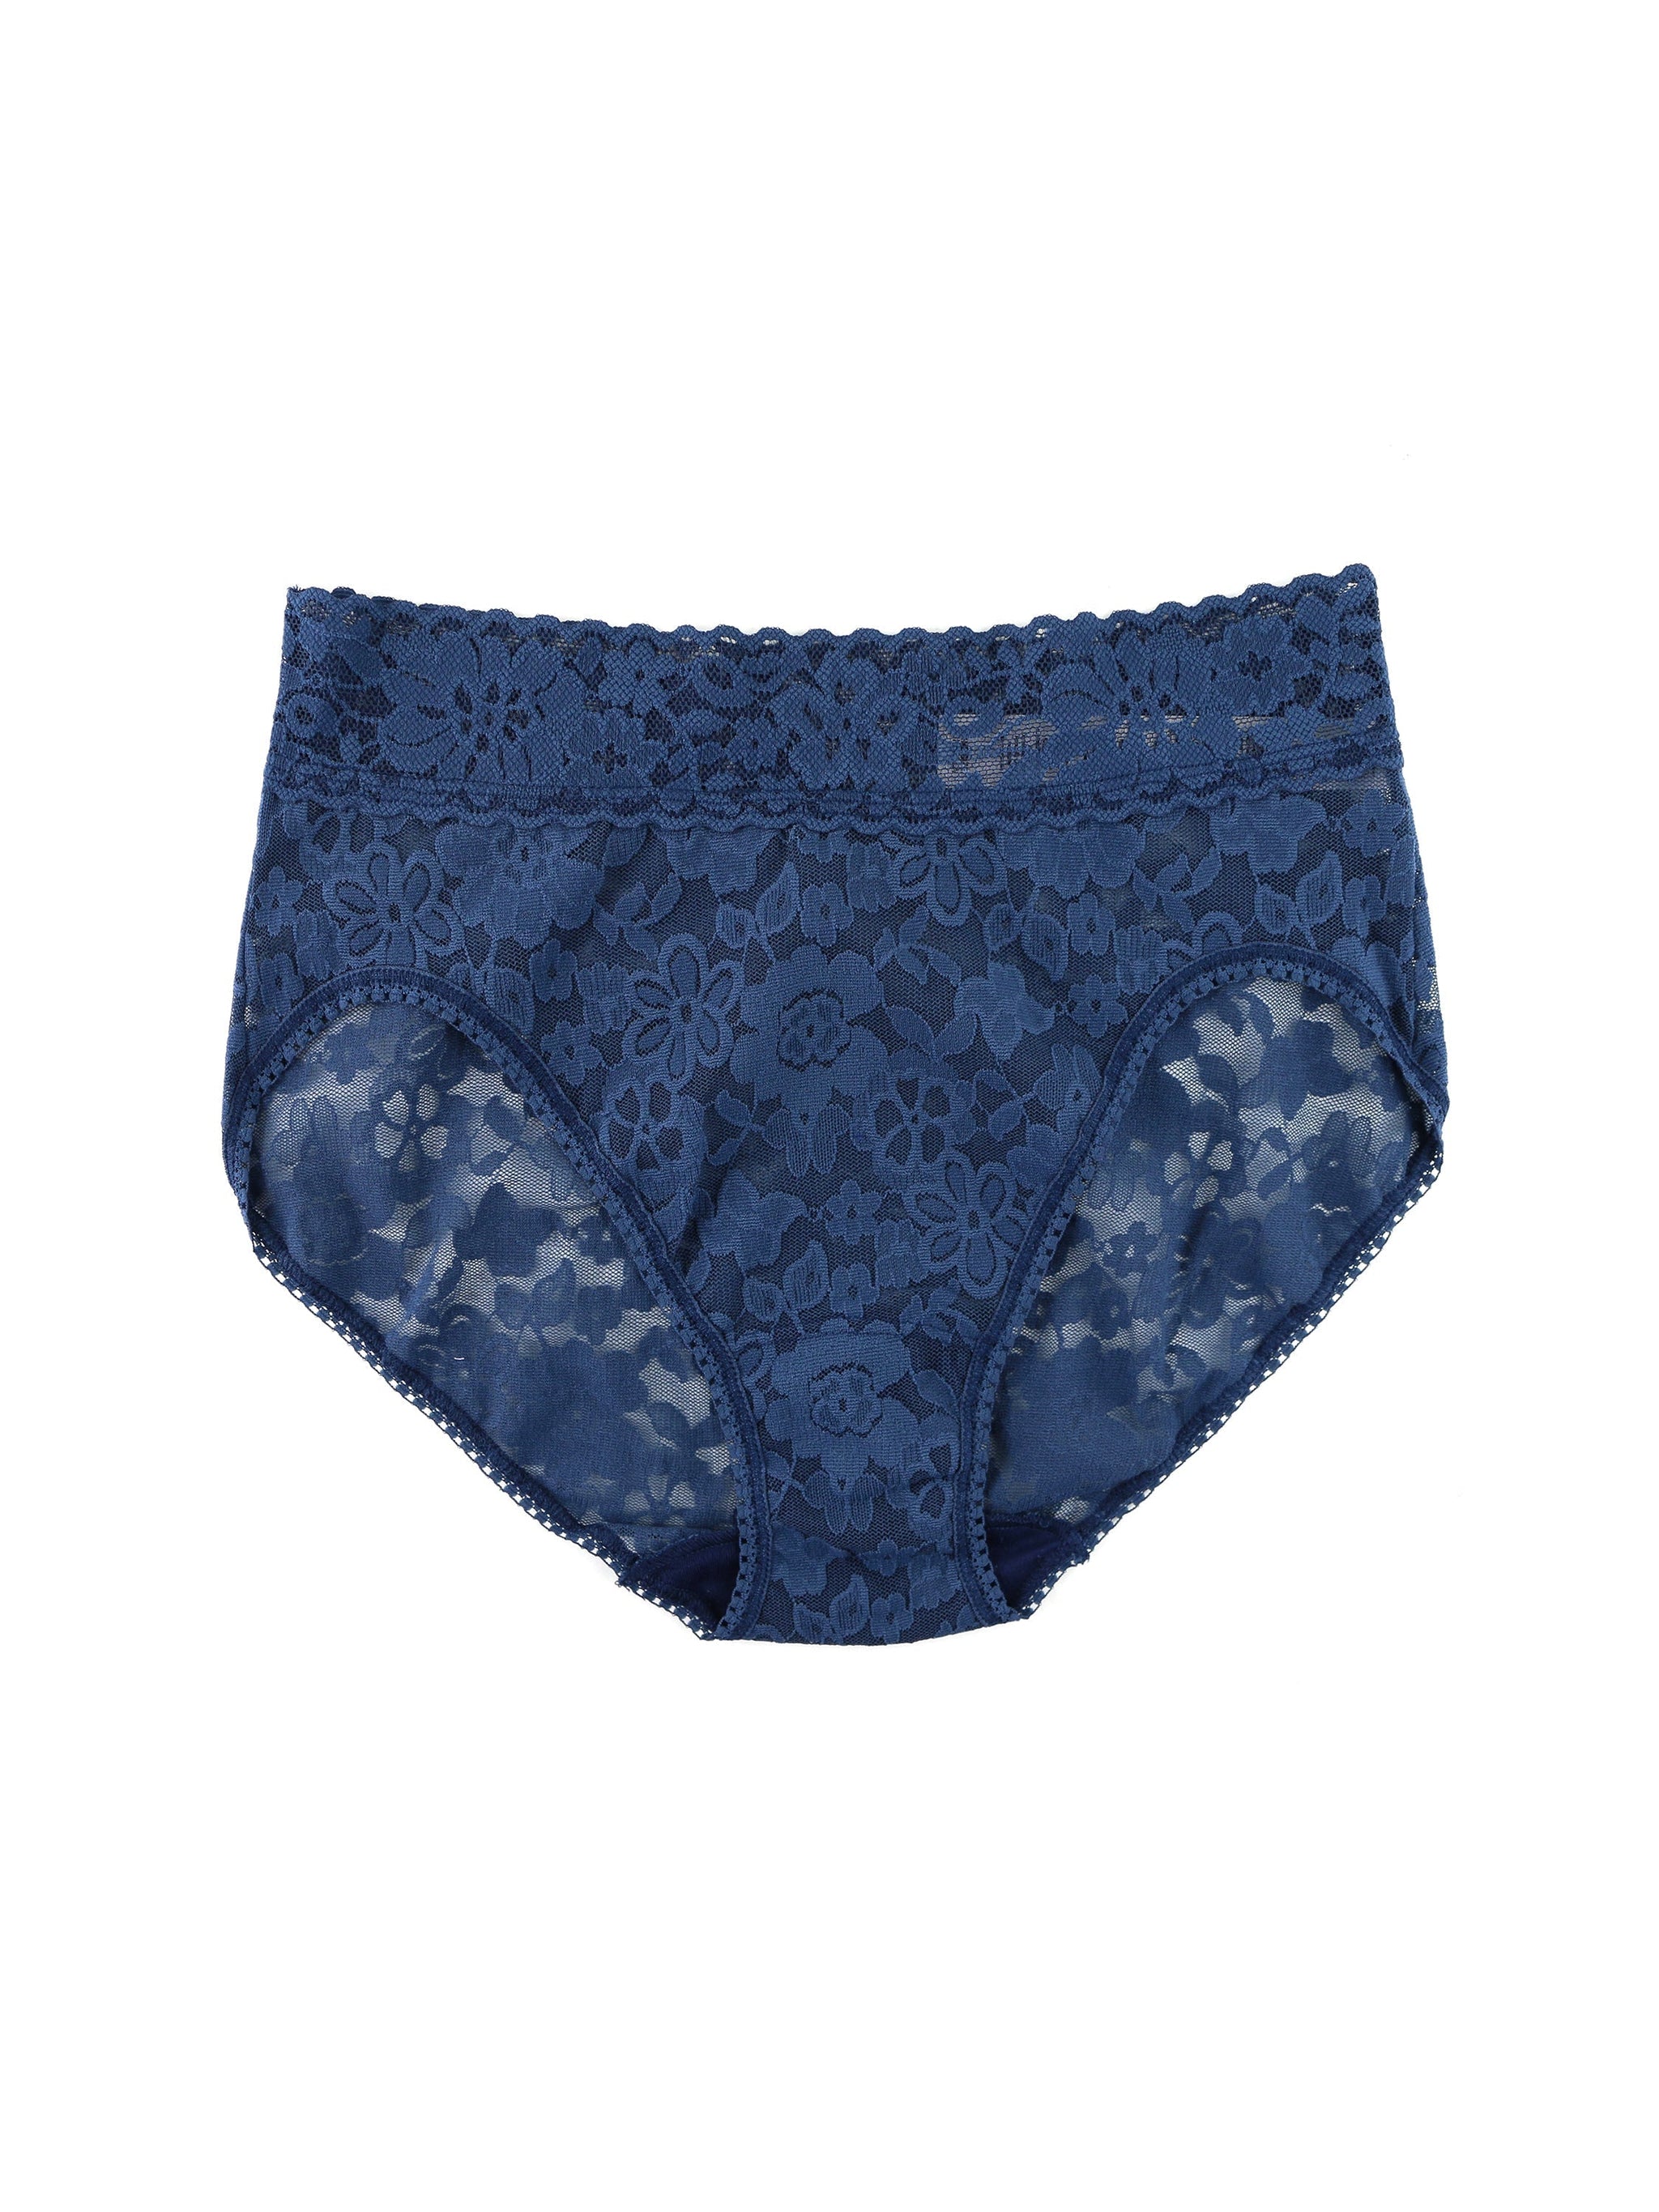 Daily Lace™ French Brief Nightshade Blue Sale